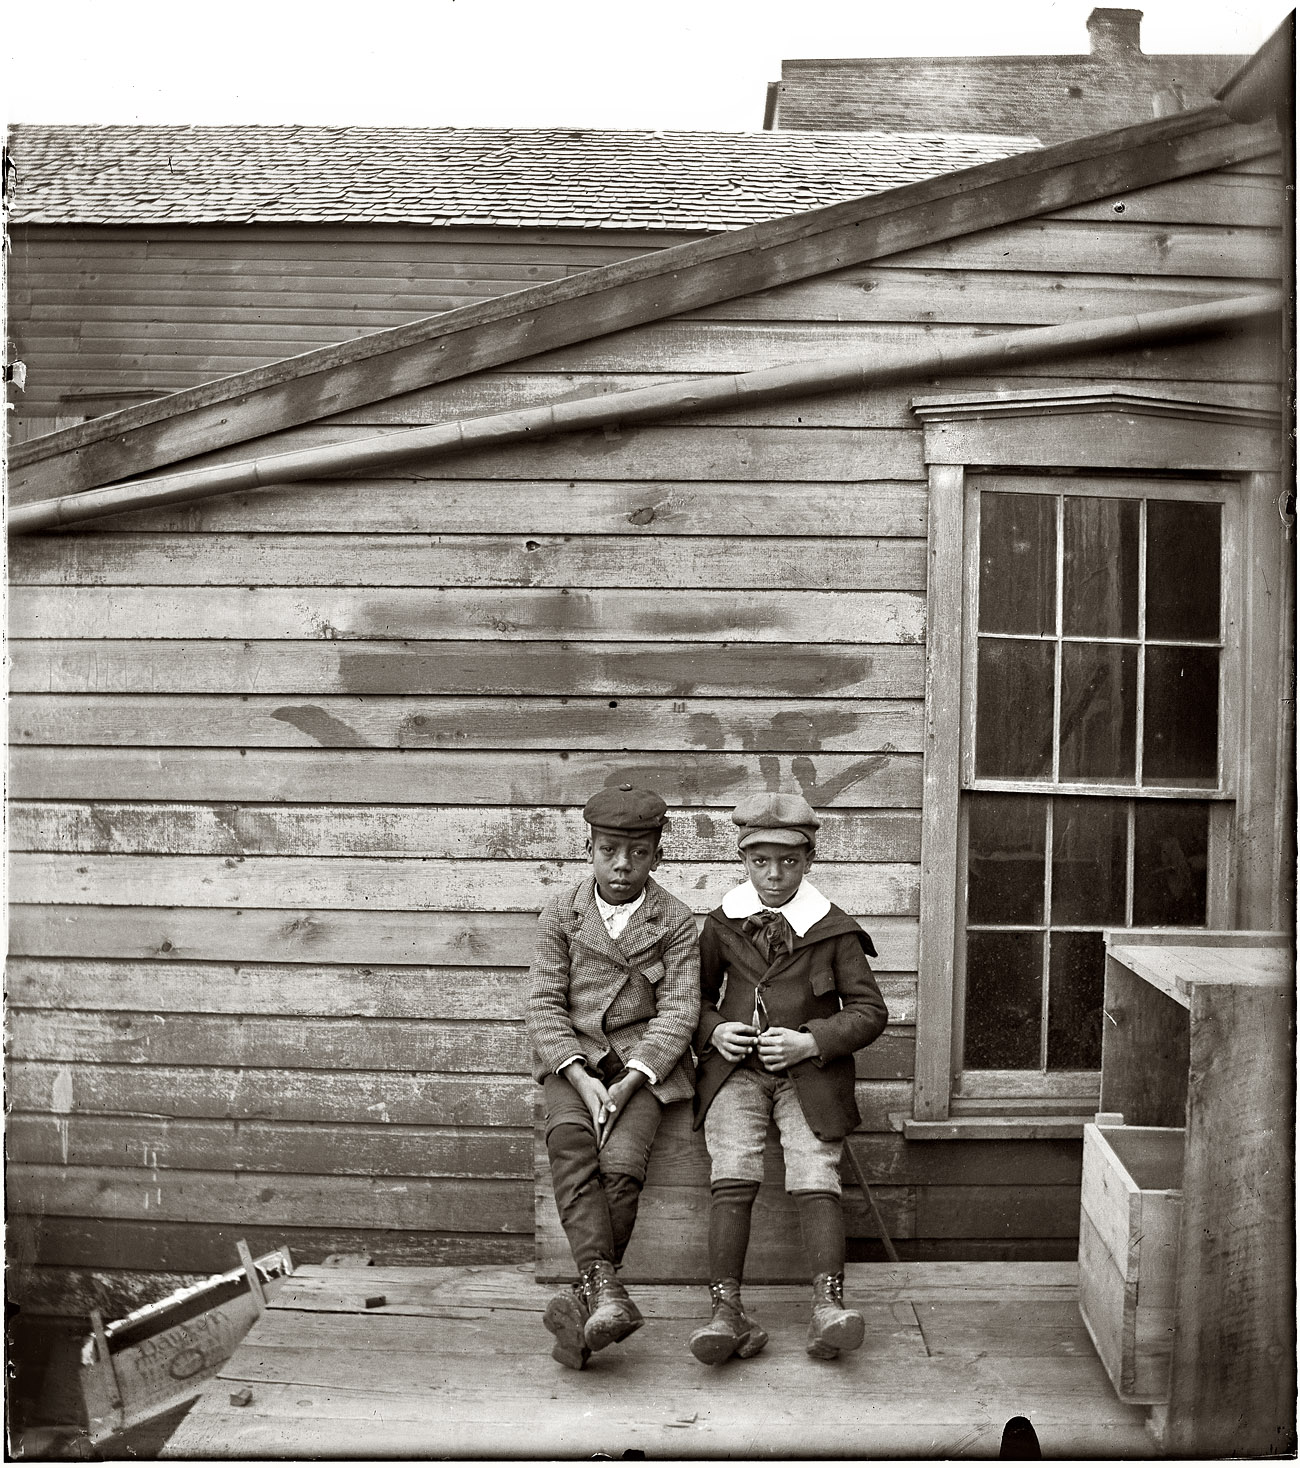 Clarence "Grandpa" Liv and Alonzo "Teddy" Tucker behind the Wright Cycle Company on West Third Street in Dayton, Ohio, circa 1897-1901. 4x5 dry-plate glass negative by Wilbur and/or Orville Wright. View full size.
